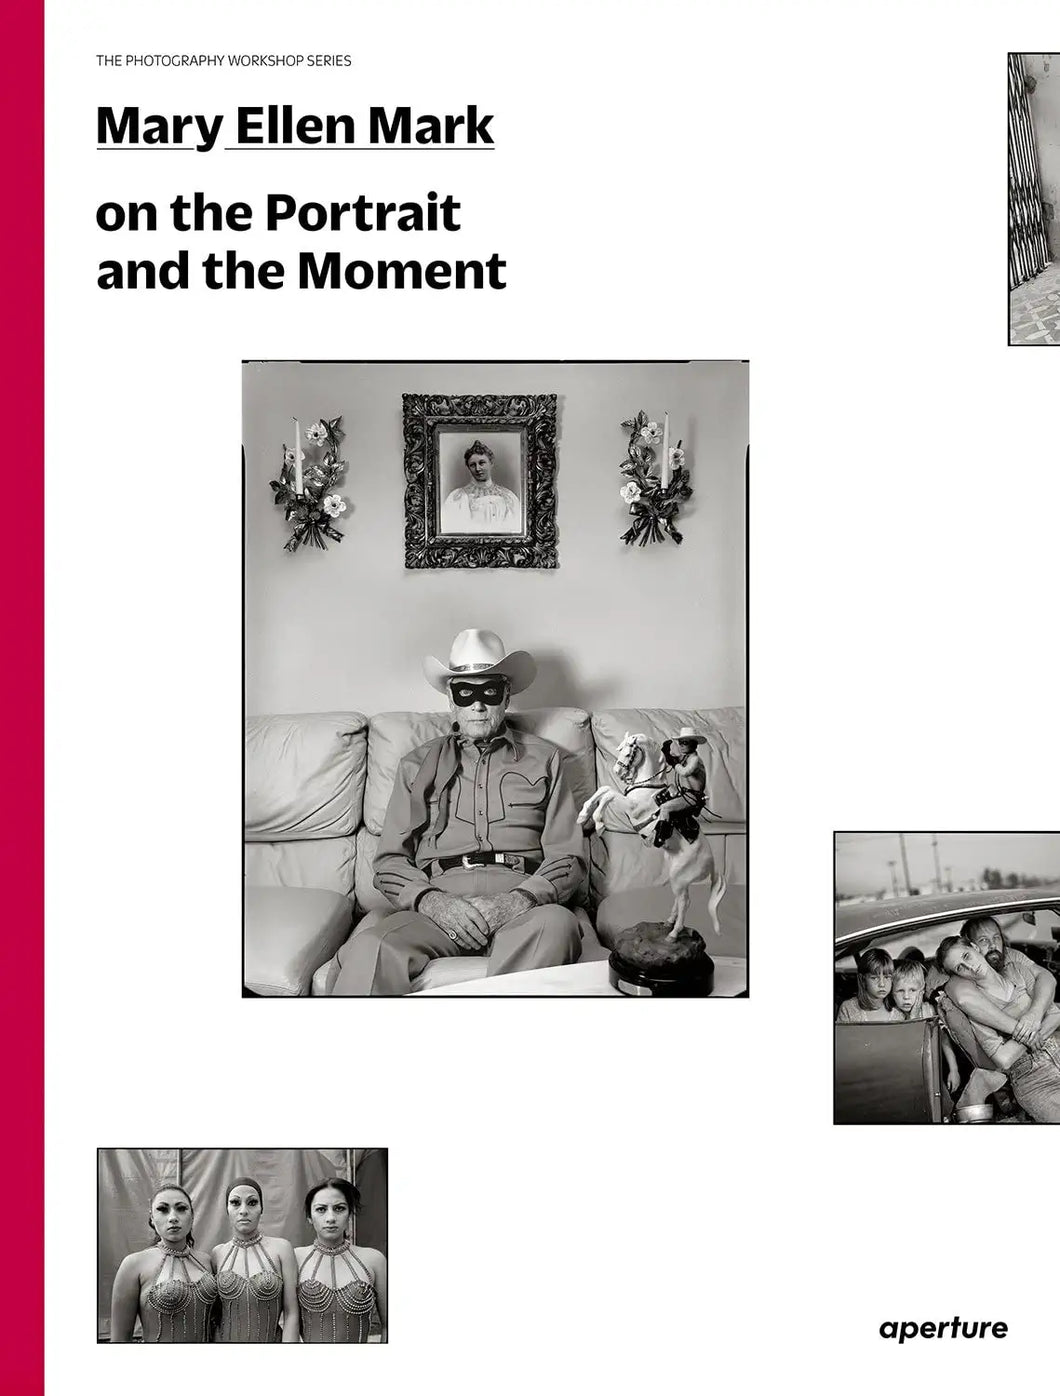 Mary Ellen Mark on the Portrait and the Moment